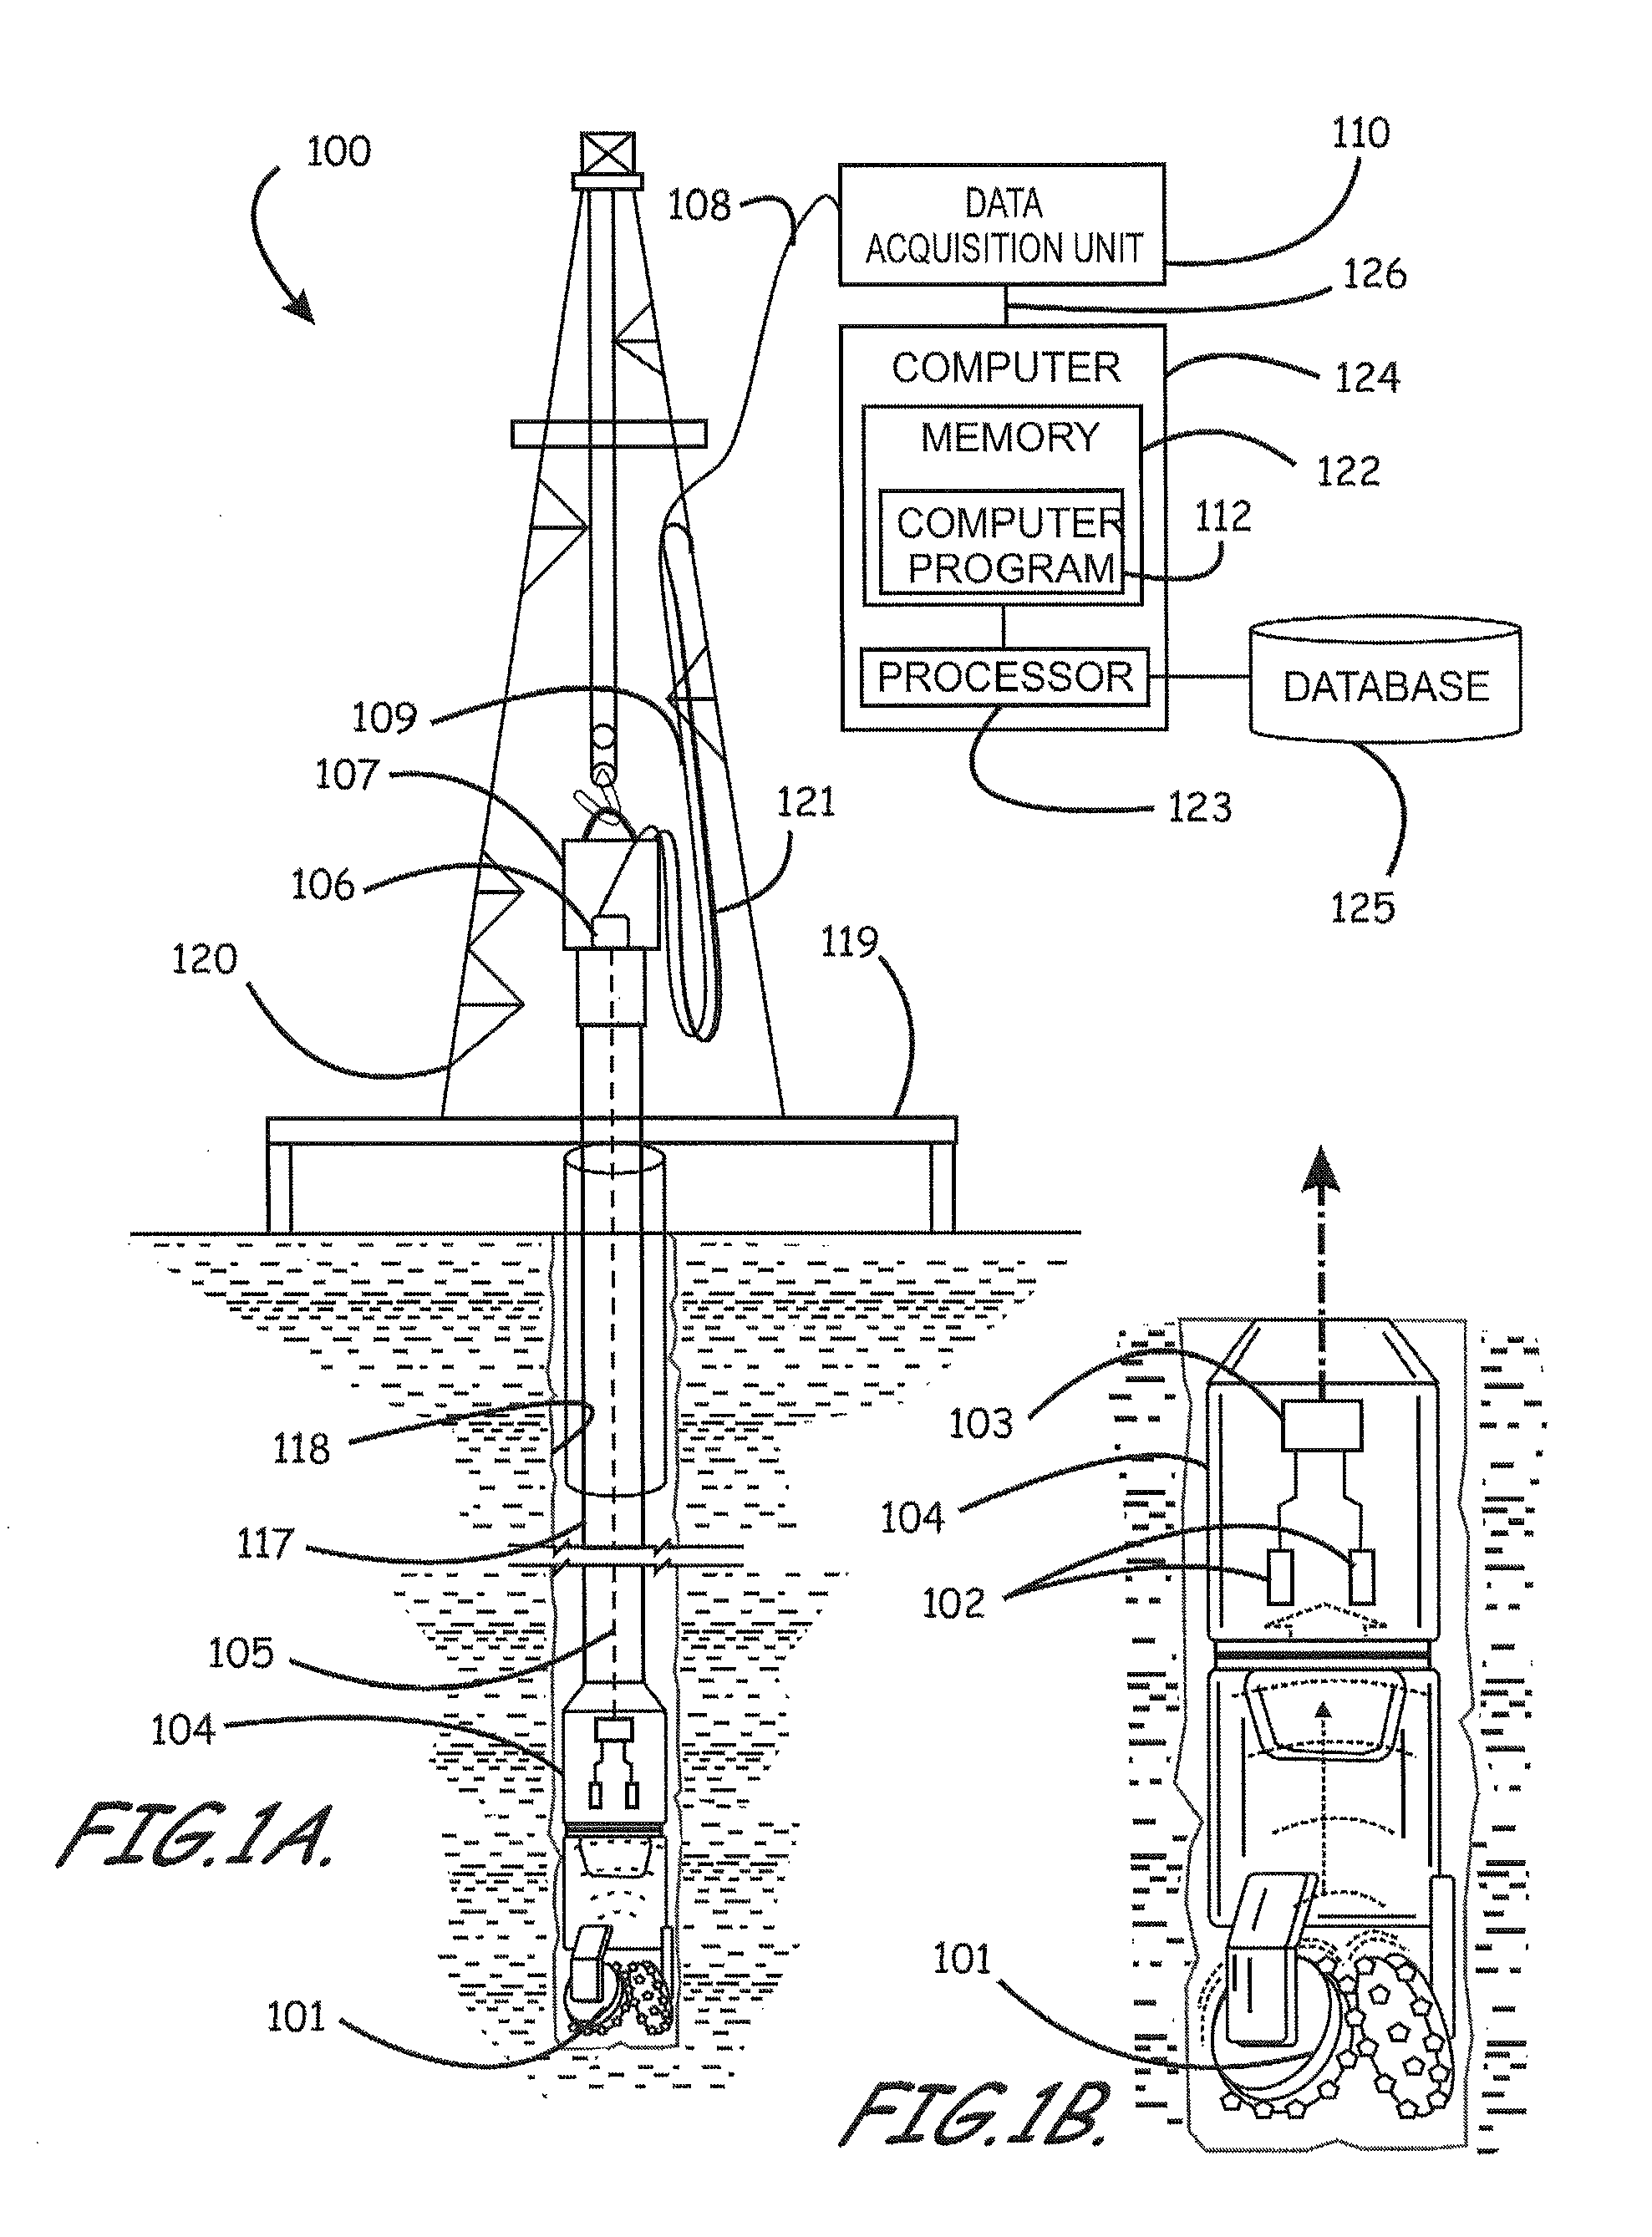 Apparatus, program product, and methods of evaluating rock properties while drilling using downhole acoustic sensors and a downhole broadband transmitting system